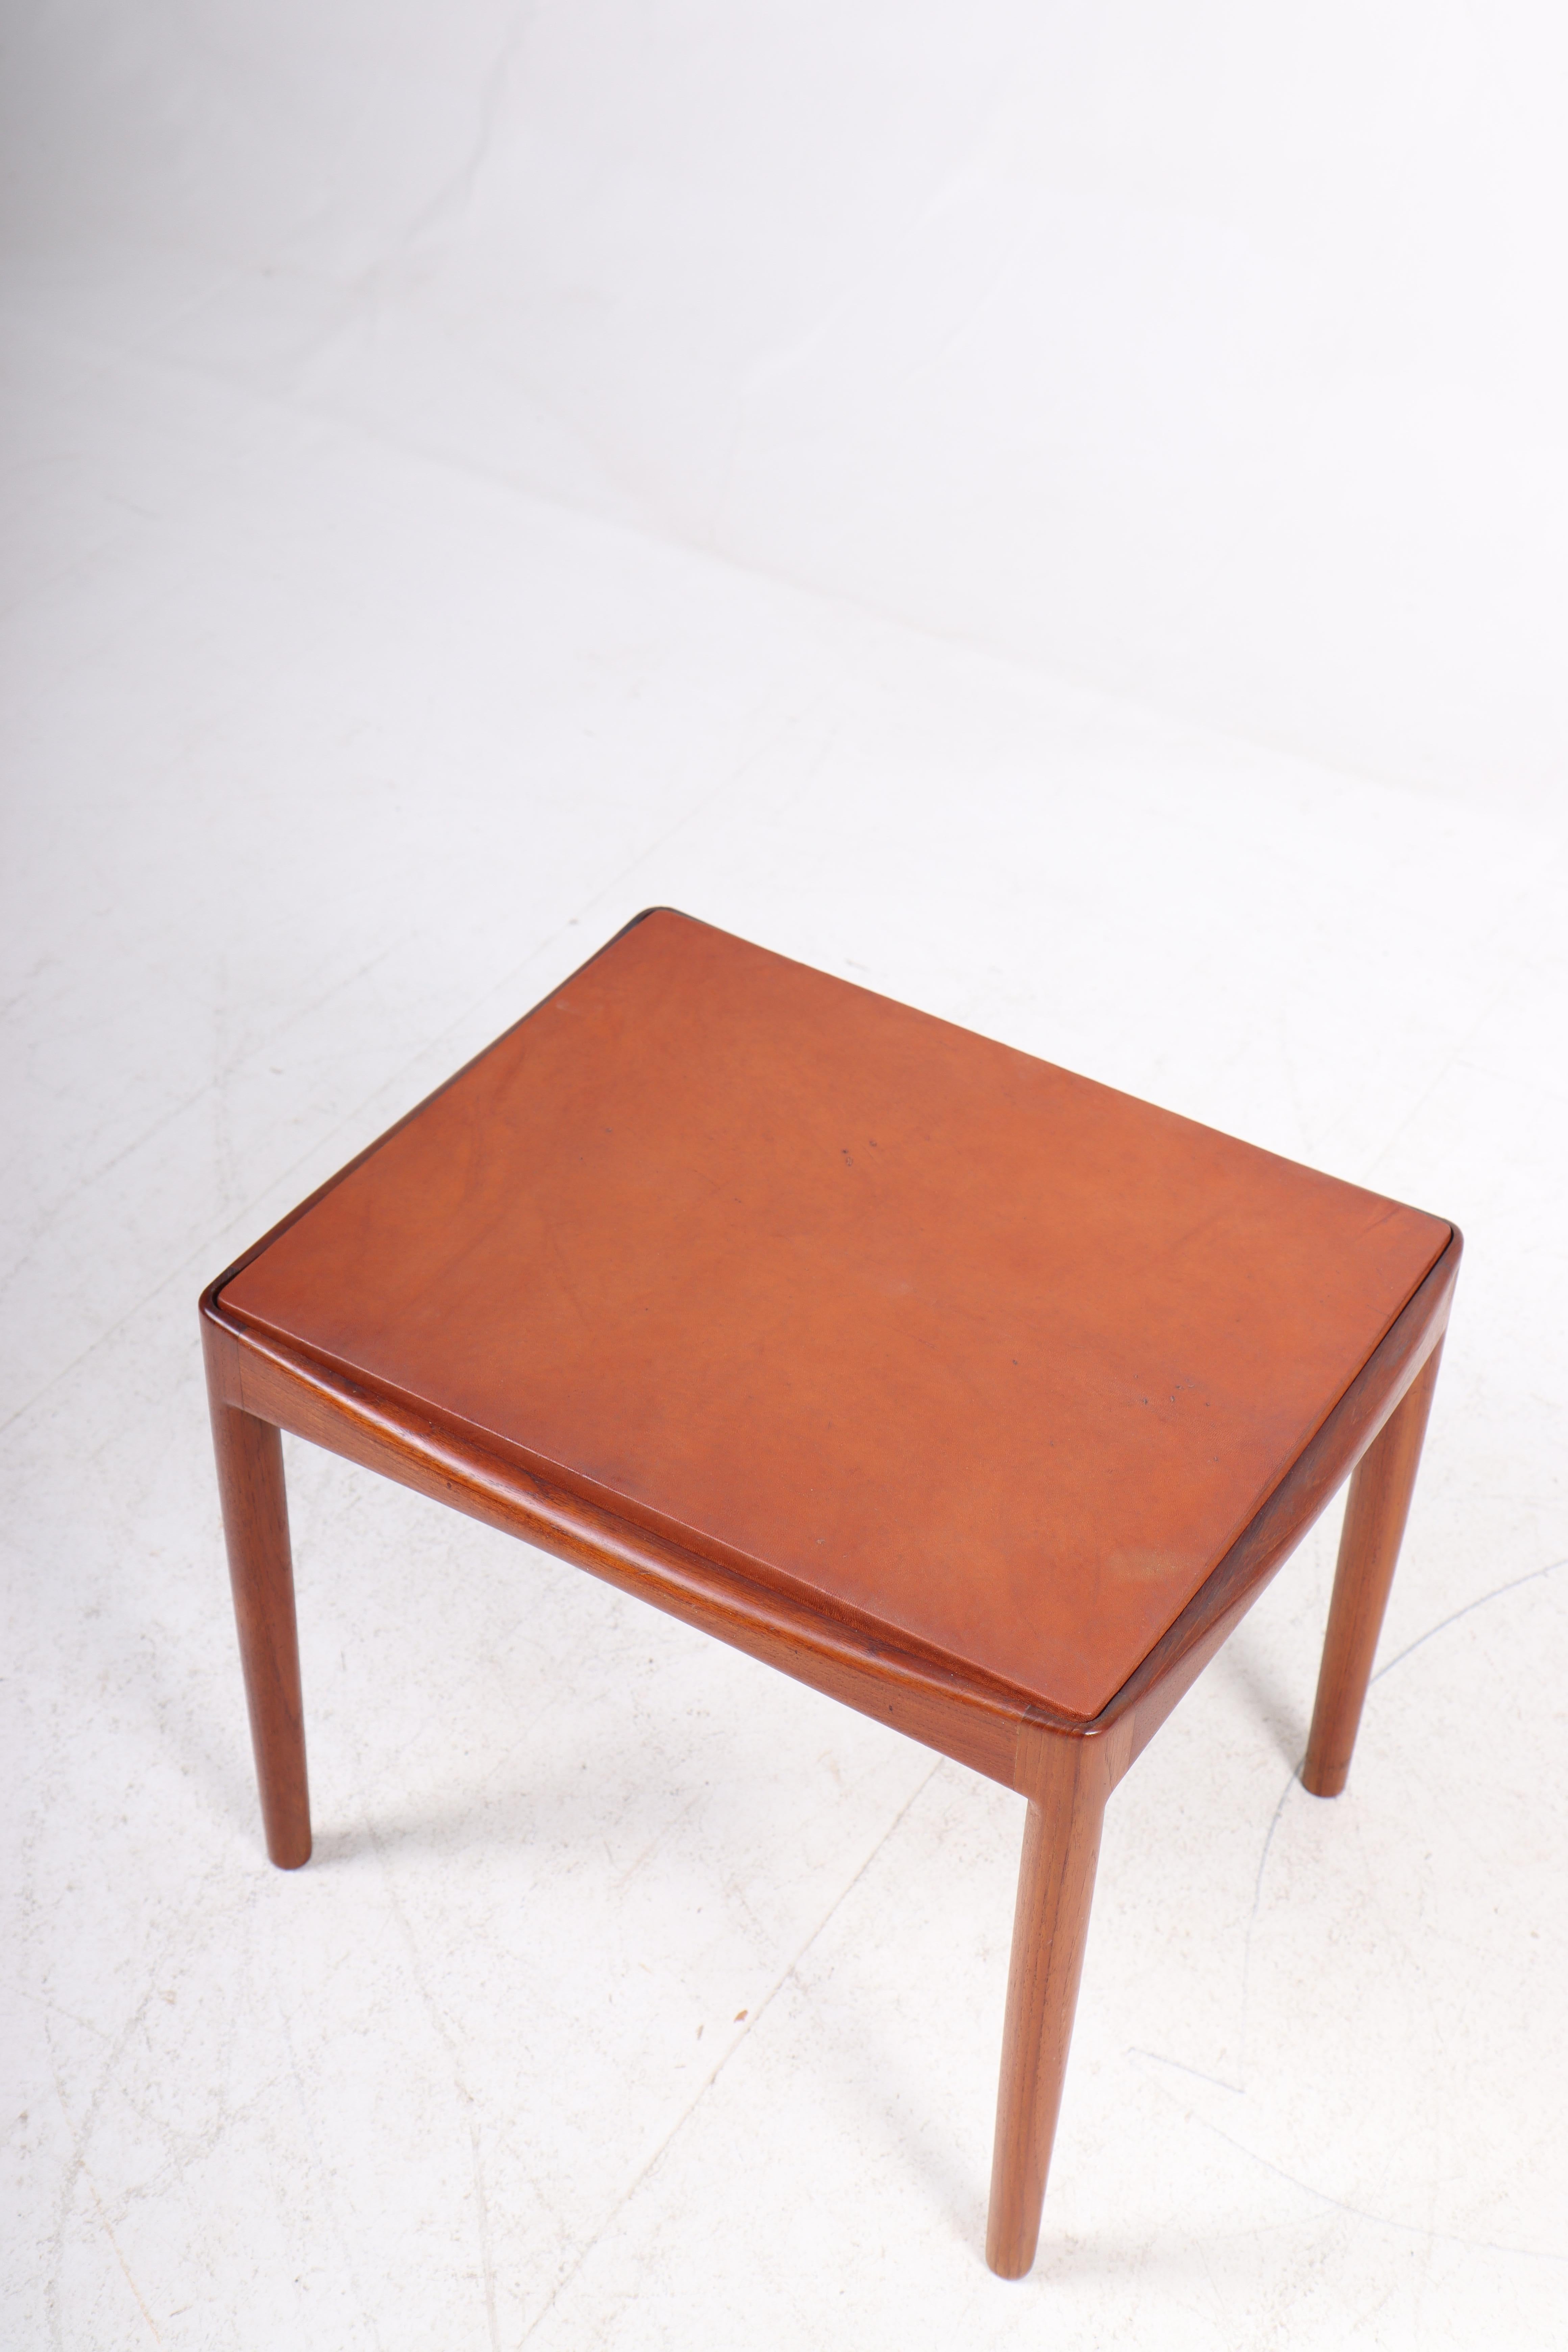 Mid-20th Century Rare Side Table in Teak and Leather by Ejner Larsen & Aksel Bender Madsen For Sale